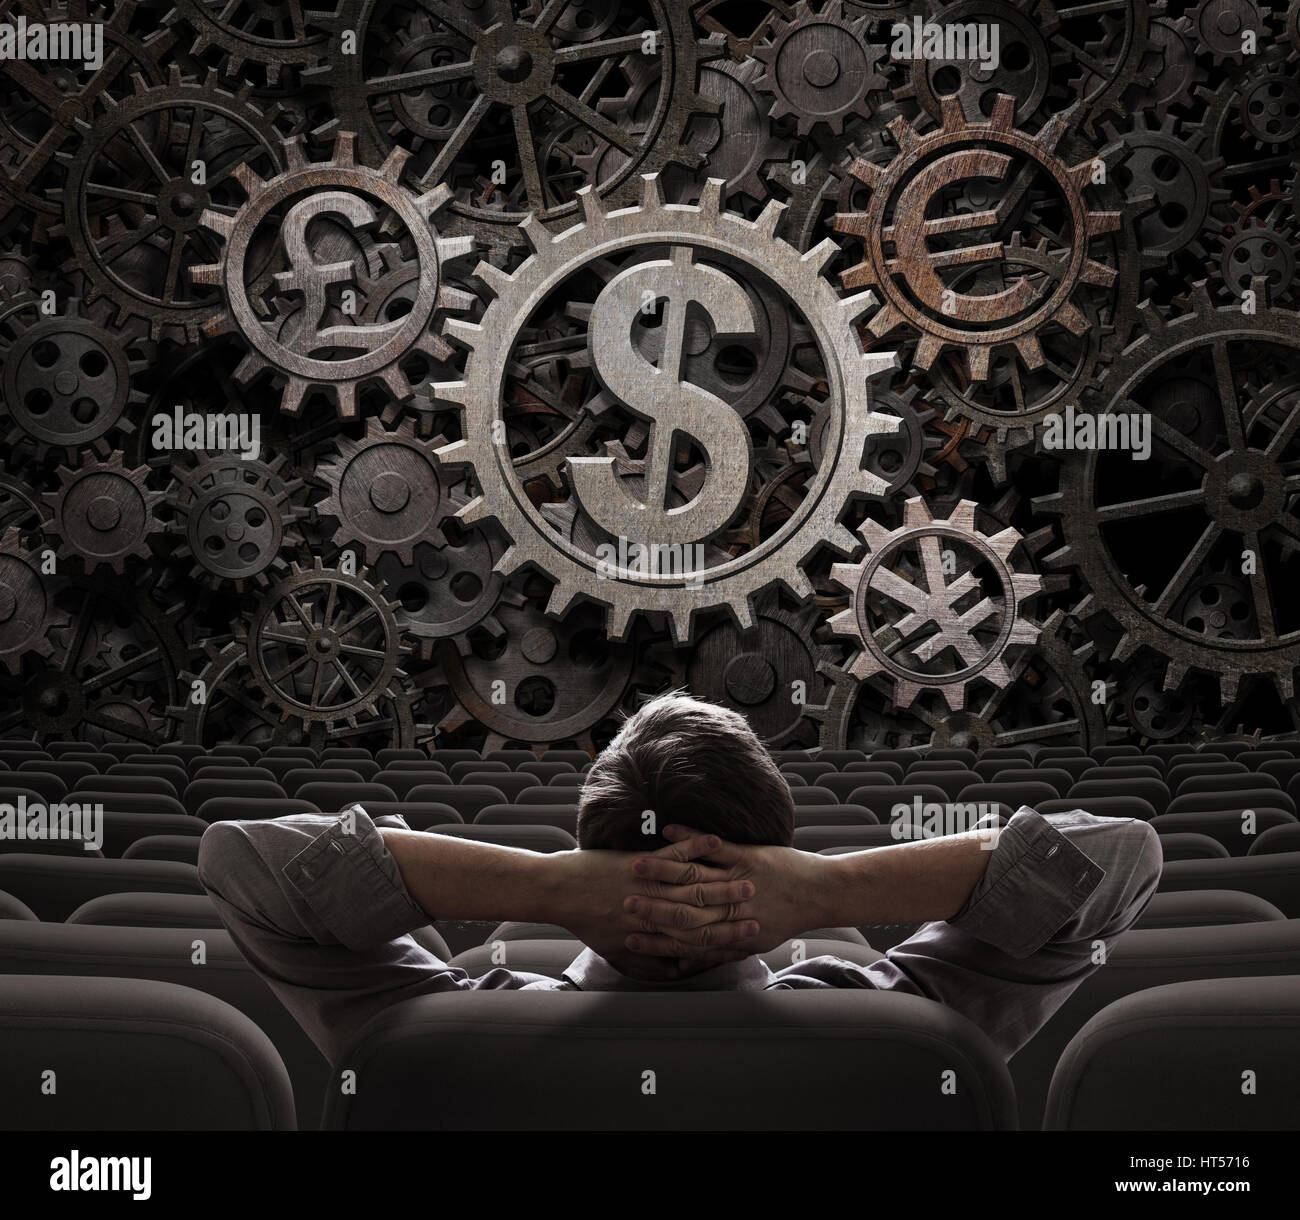 trader or investor looking on main currencies working gears 3d illustration Stock Photo